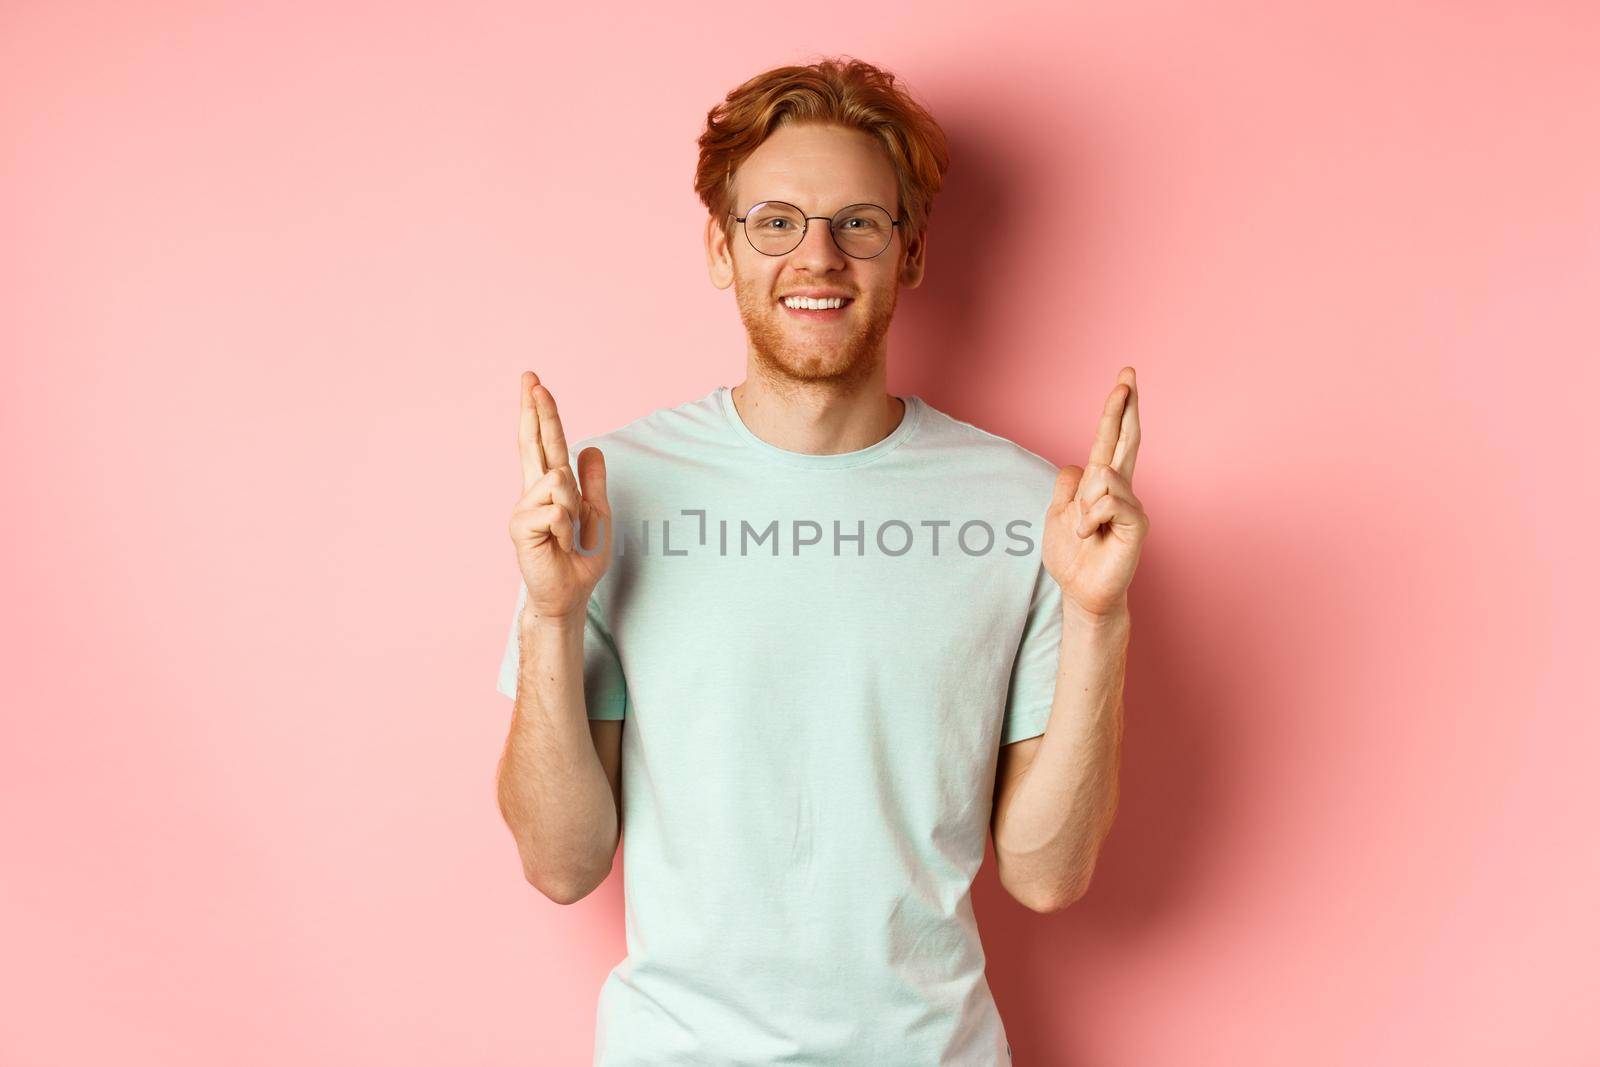 Attractive guy having faith in dreams, smiling hopeful and making wish with fingers crossed, feeling lucky, standing over pink background.